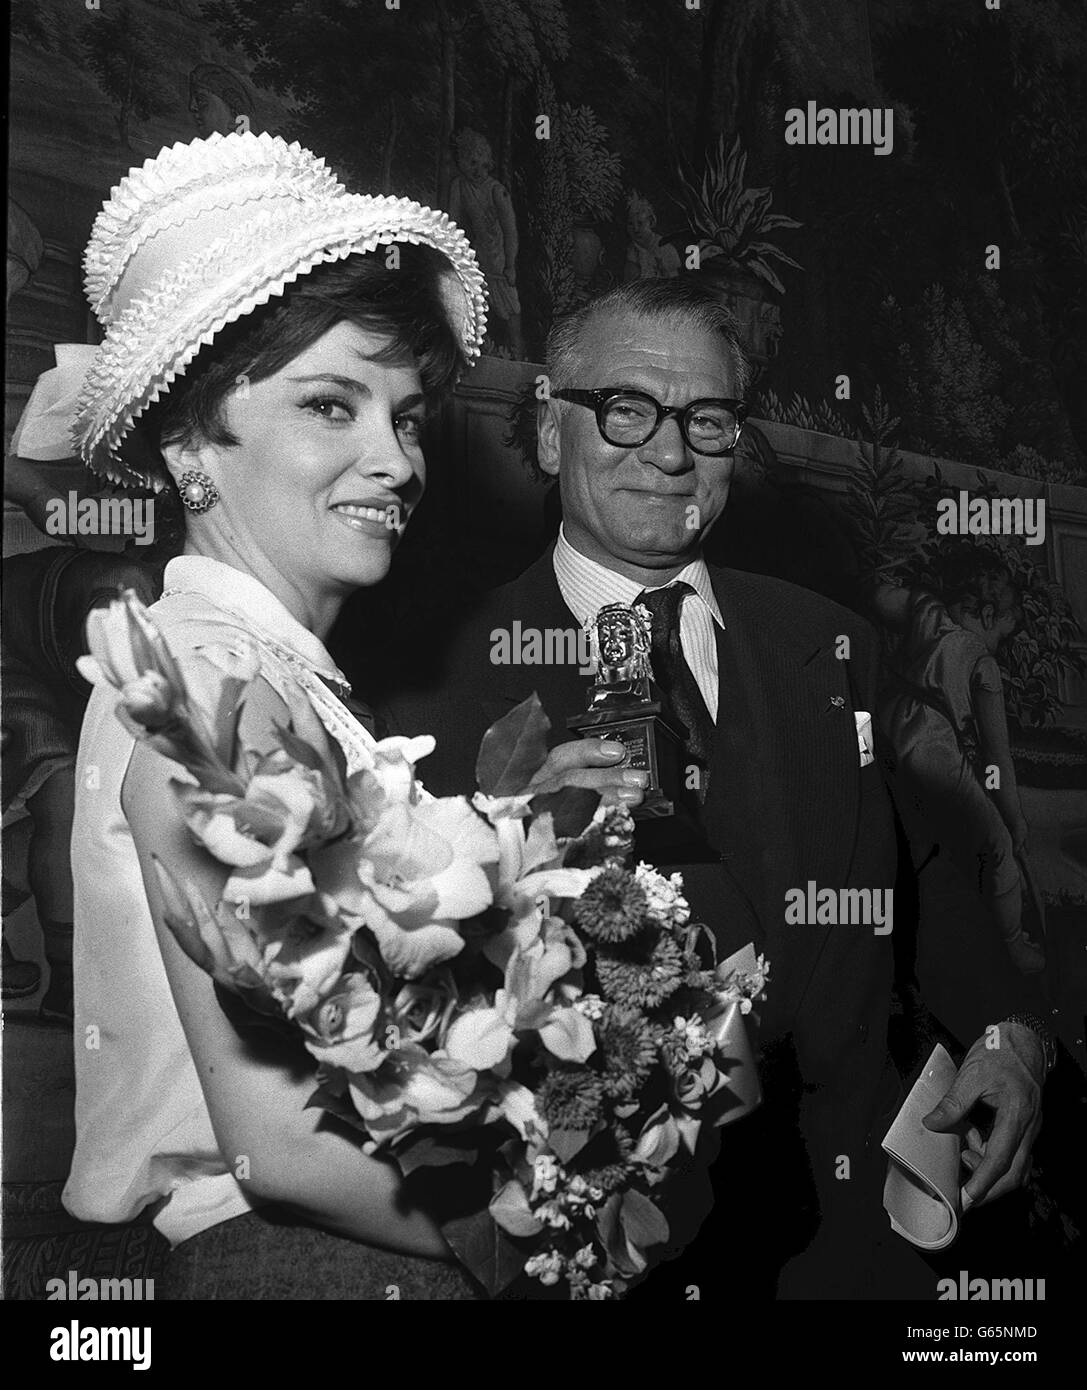 Gina Lollobrigida, the Italian film star who had flown over for the occasion, with Sir Laurence Olivier, who holds the Olimpo Award he has just received from the Ambassador, Signor Pitro Quaroni, at the Italian embassy in London. This is the first opportunity Sir Laurence has had to receive the prize which is part of the David di Donatello awards, the Italian equivalent of the American Oscars. It was presented in recognition of his work in the theatre in 1962. Stock Photo